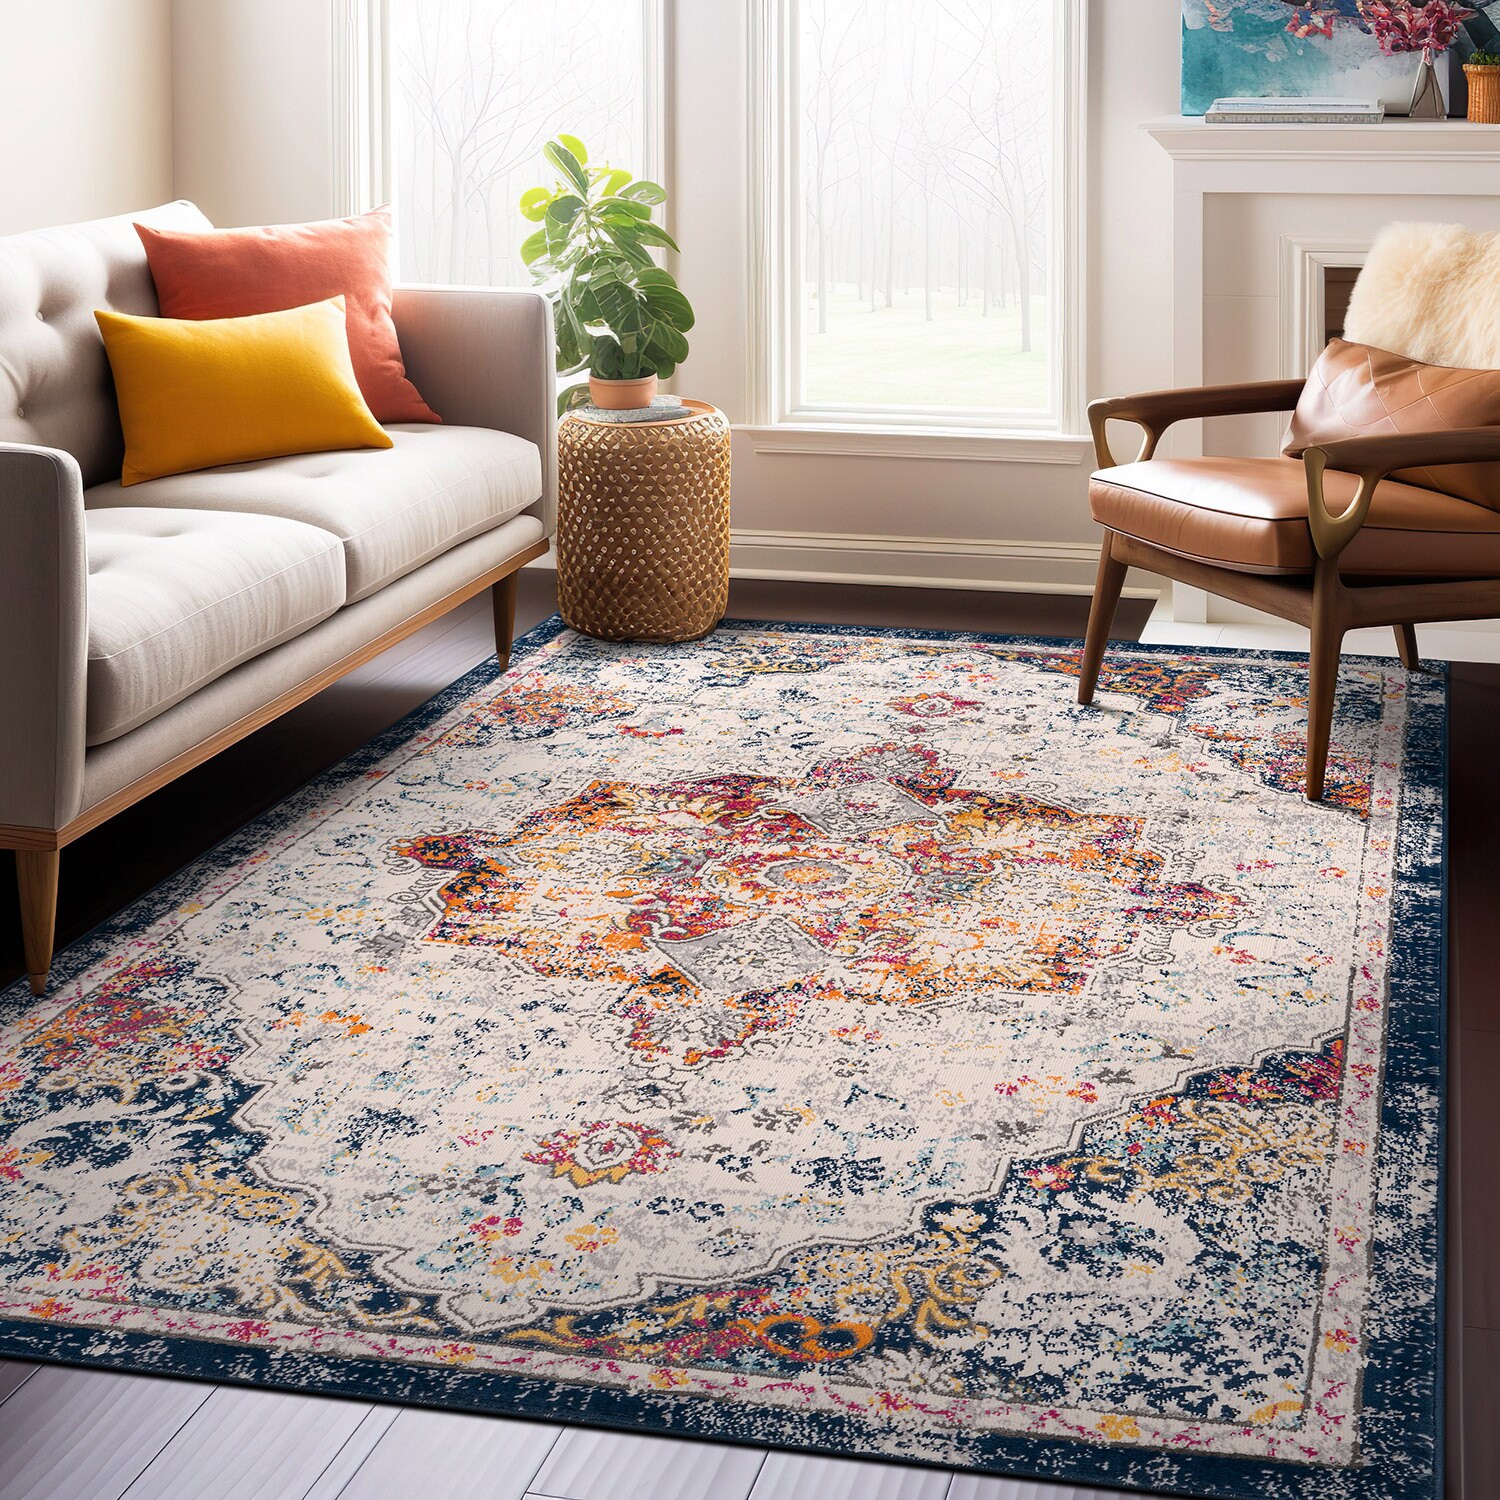 2'x3' Solid Utility Accent Rug Mid Gray - Made By Design™